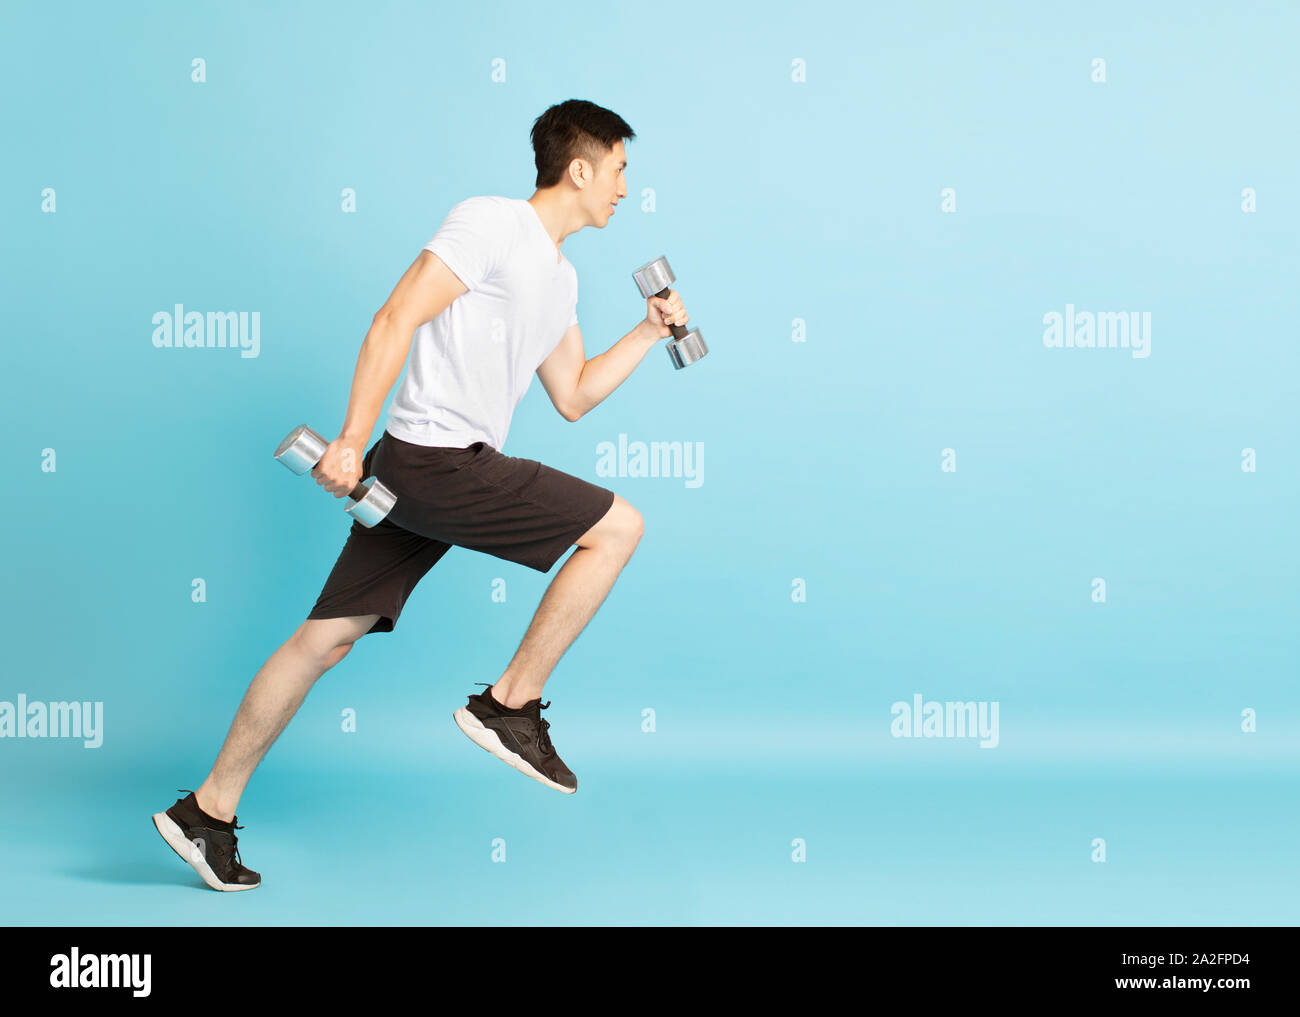 Full length portrait of young fitness man running Stock Photo